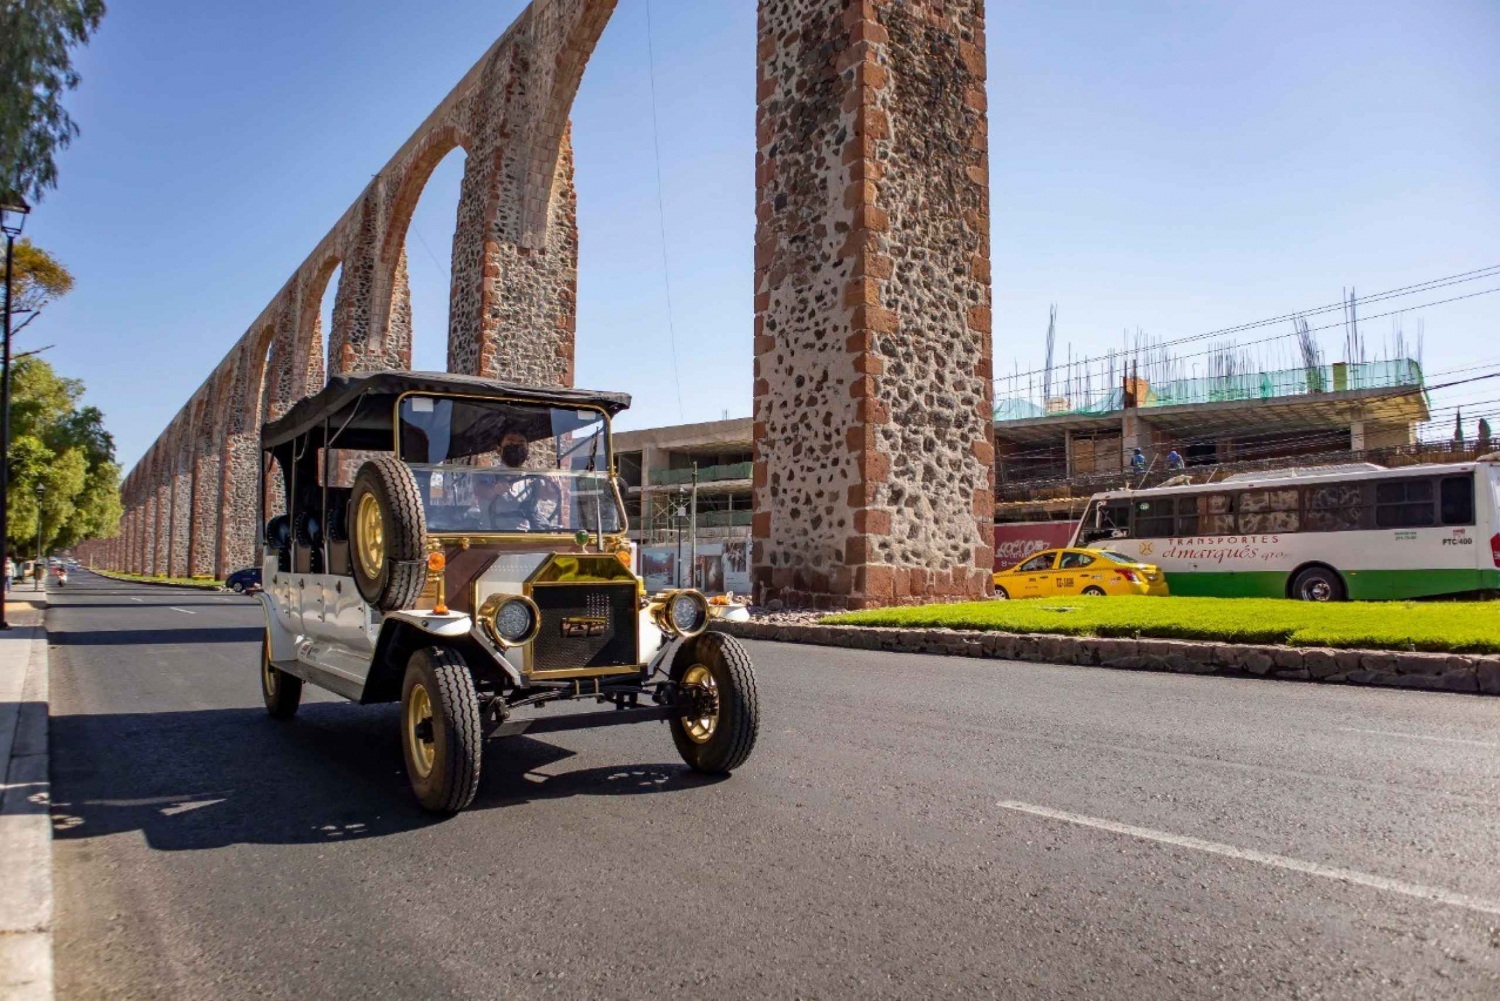 Querétaro: City Tour in a Classic Ford T Vehicle